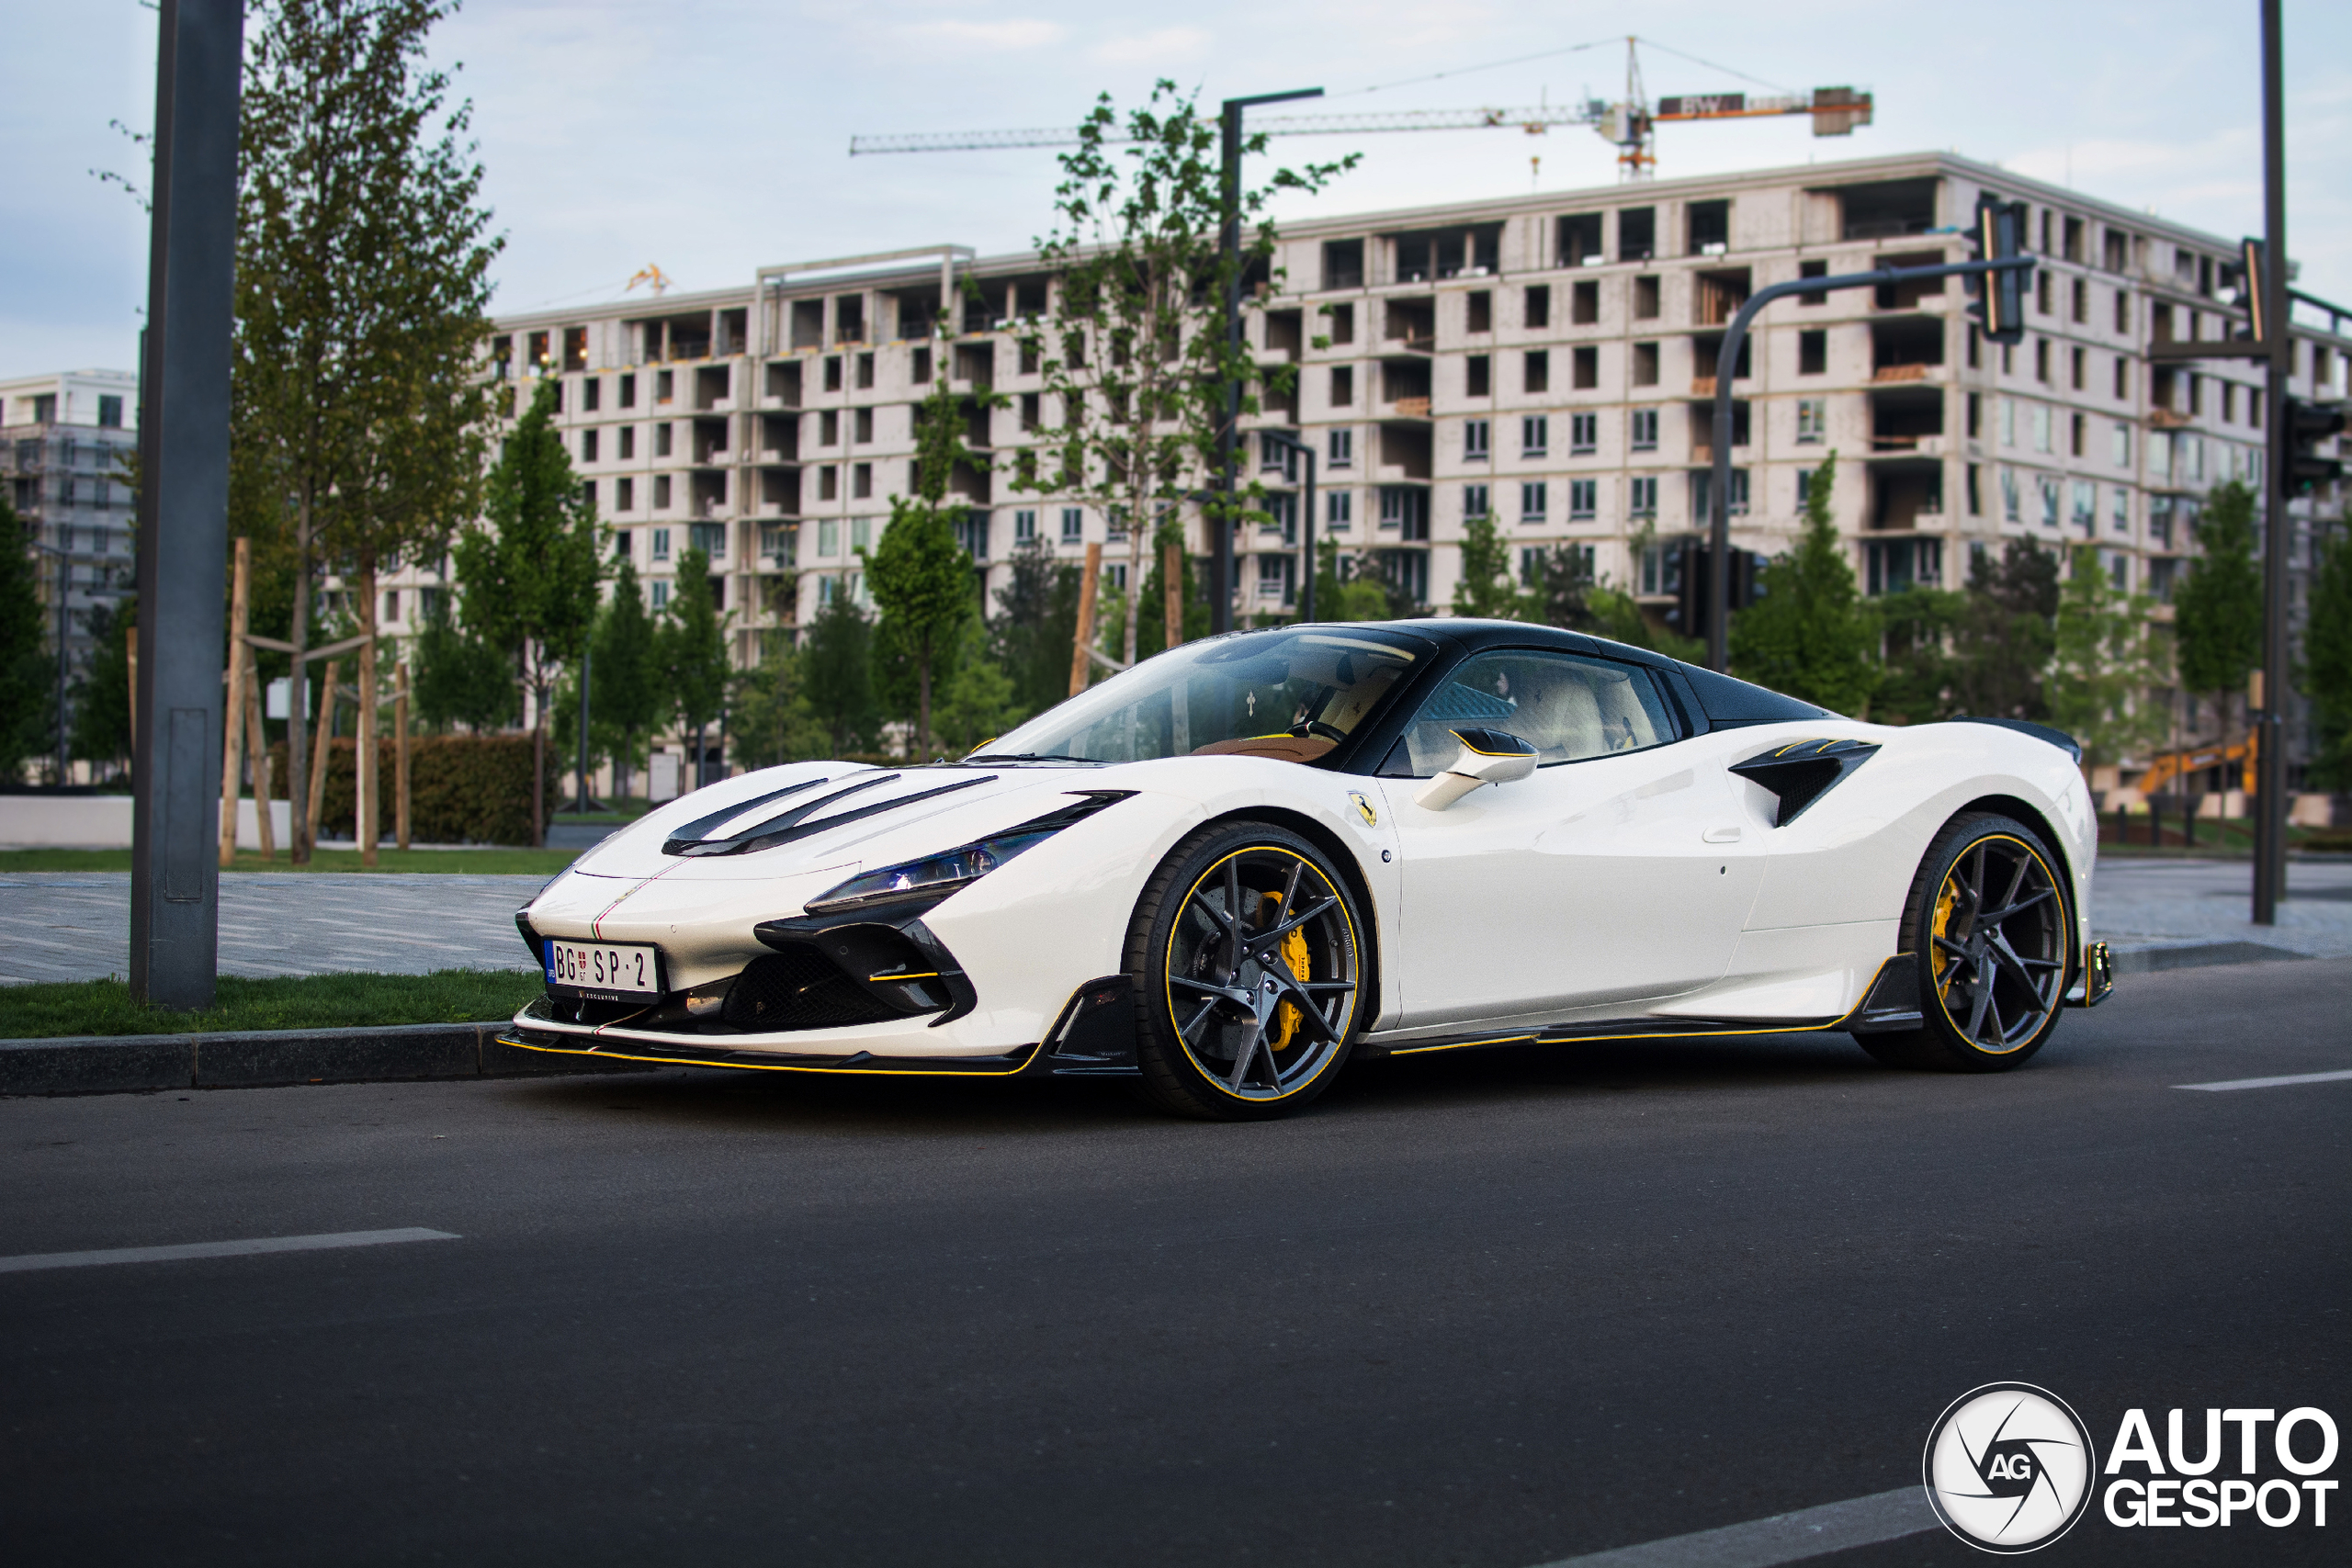 Why Leasing an Exotic Car Makes Sense: Benefits Beyond the Price Tag